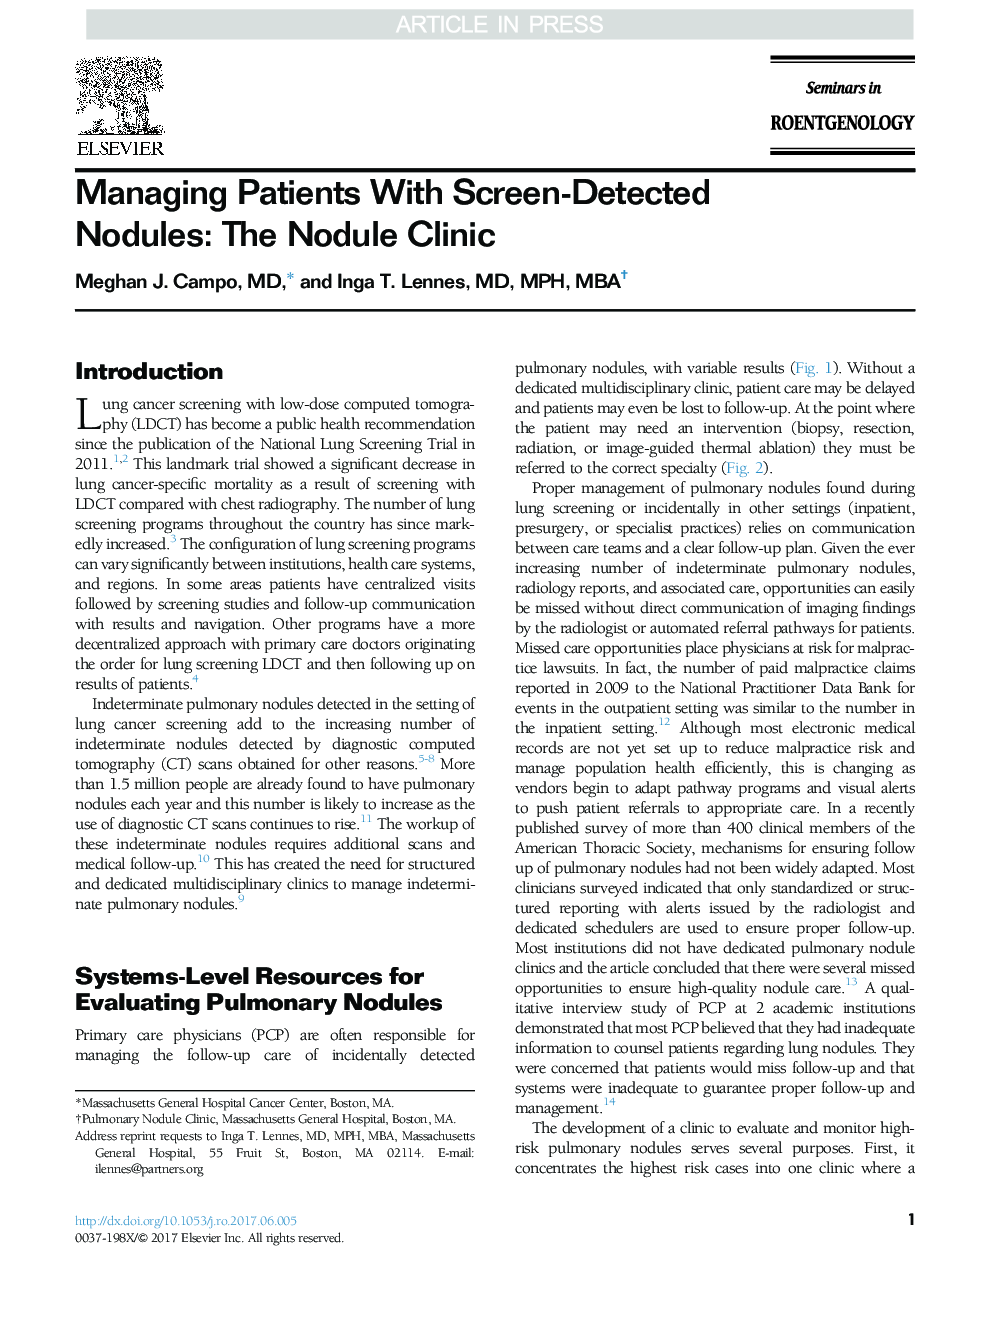 Managing Patients With Screen-Detected Nodules: The Nodule Clinic